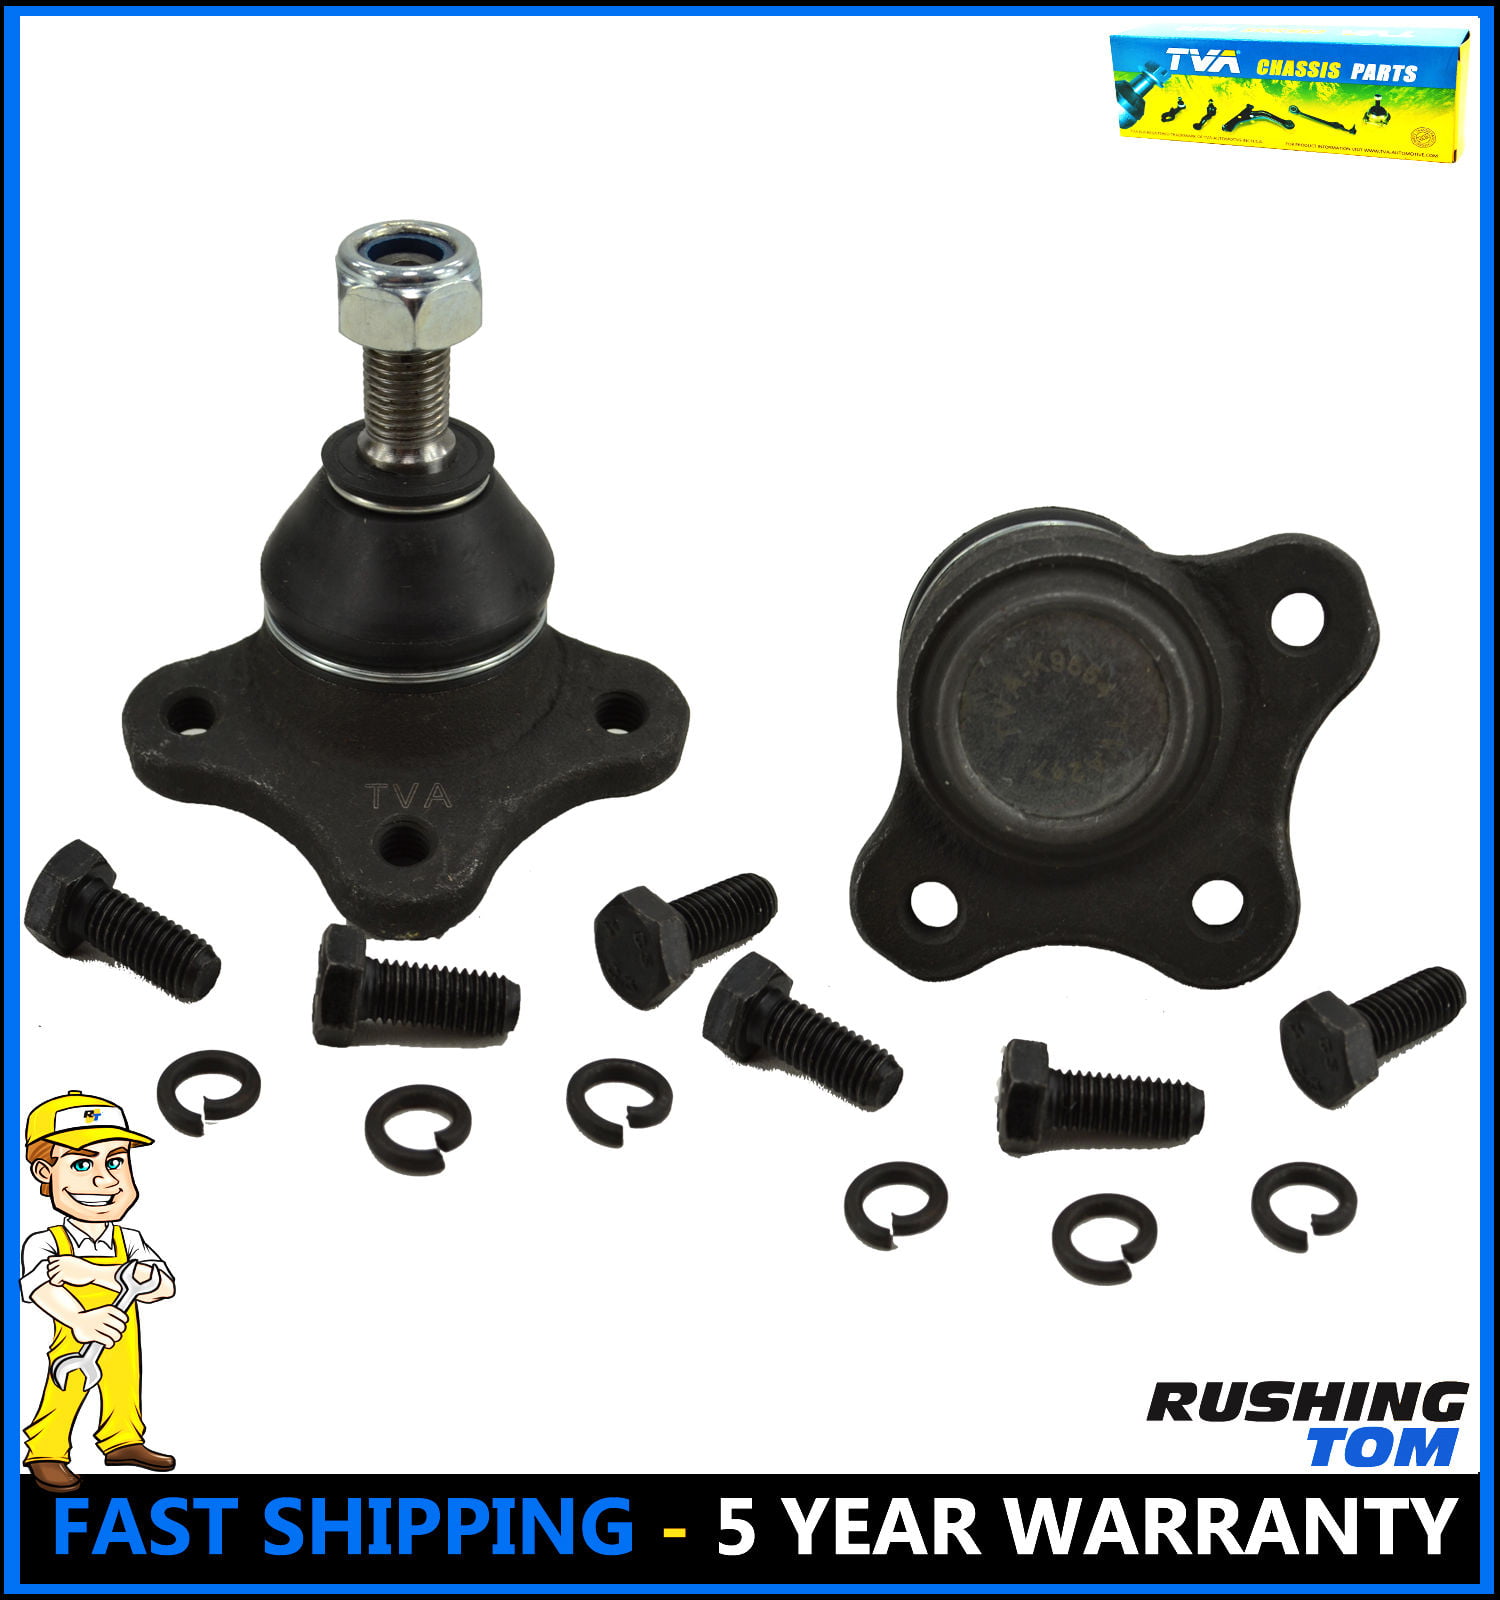 2PC Front Upper Suspension Ball Joints Mazda B2200 B2600 B2000 